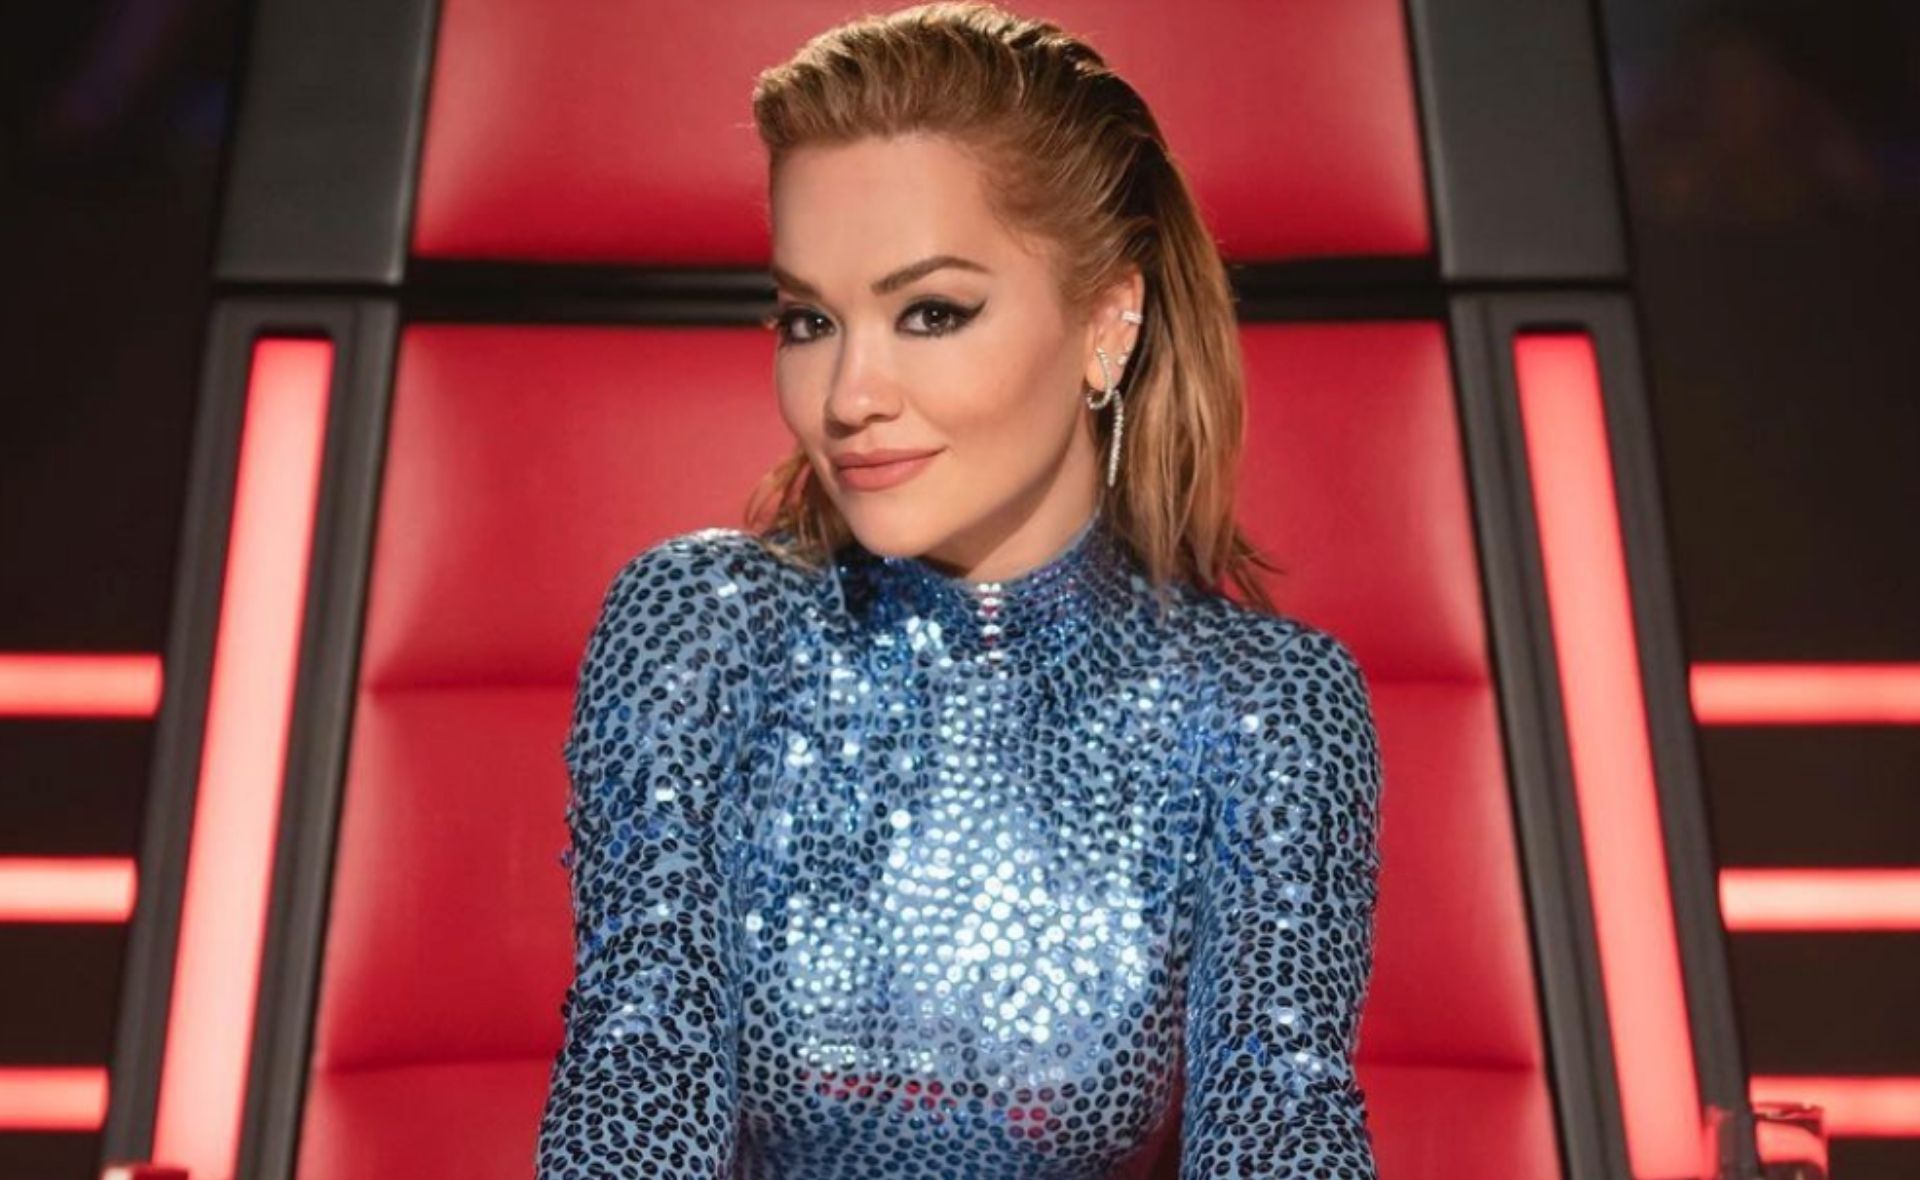 Dazzle rooms with the same ferocity as Rita Ora in this divine sequin dress on The Voice by recreating her look